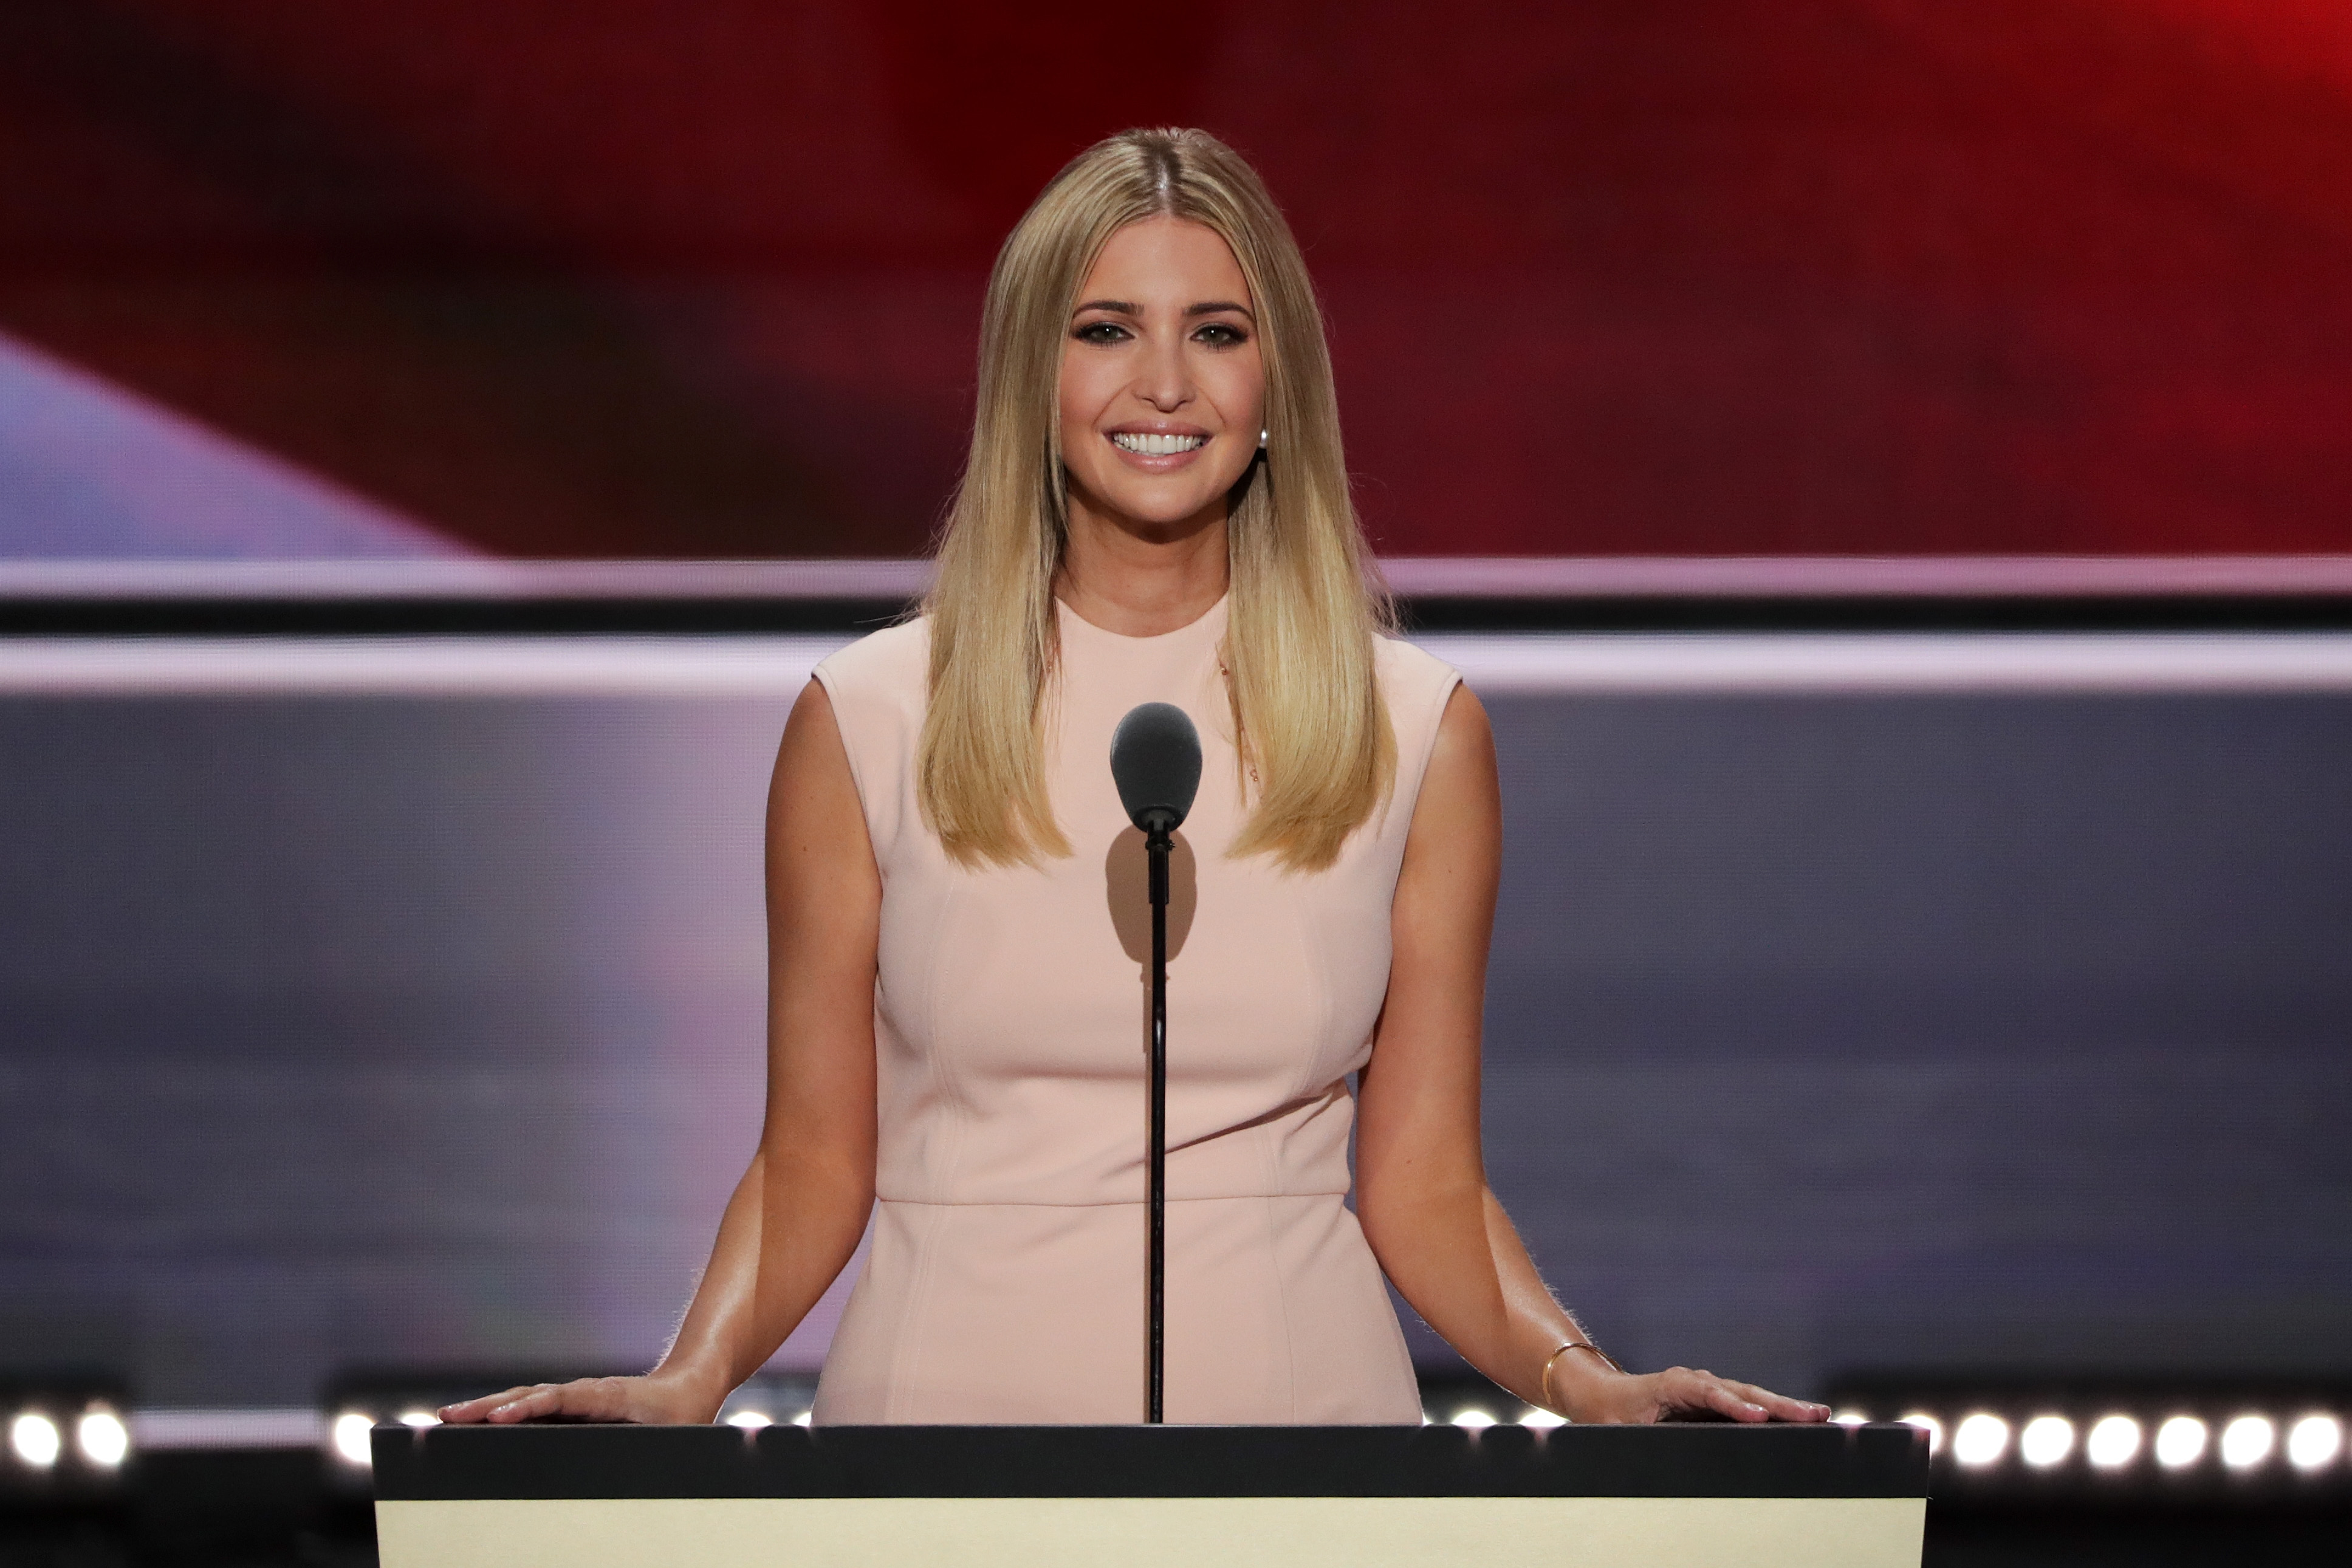 Ivanka Trump delivers a speech during the evening session on the fourth day of the Republican National Convention at the Quicken Loans Arena in Cleveland on July 21, 2016 . (Alex Wong—Getty Images)